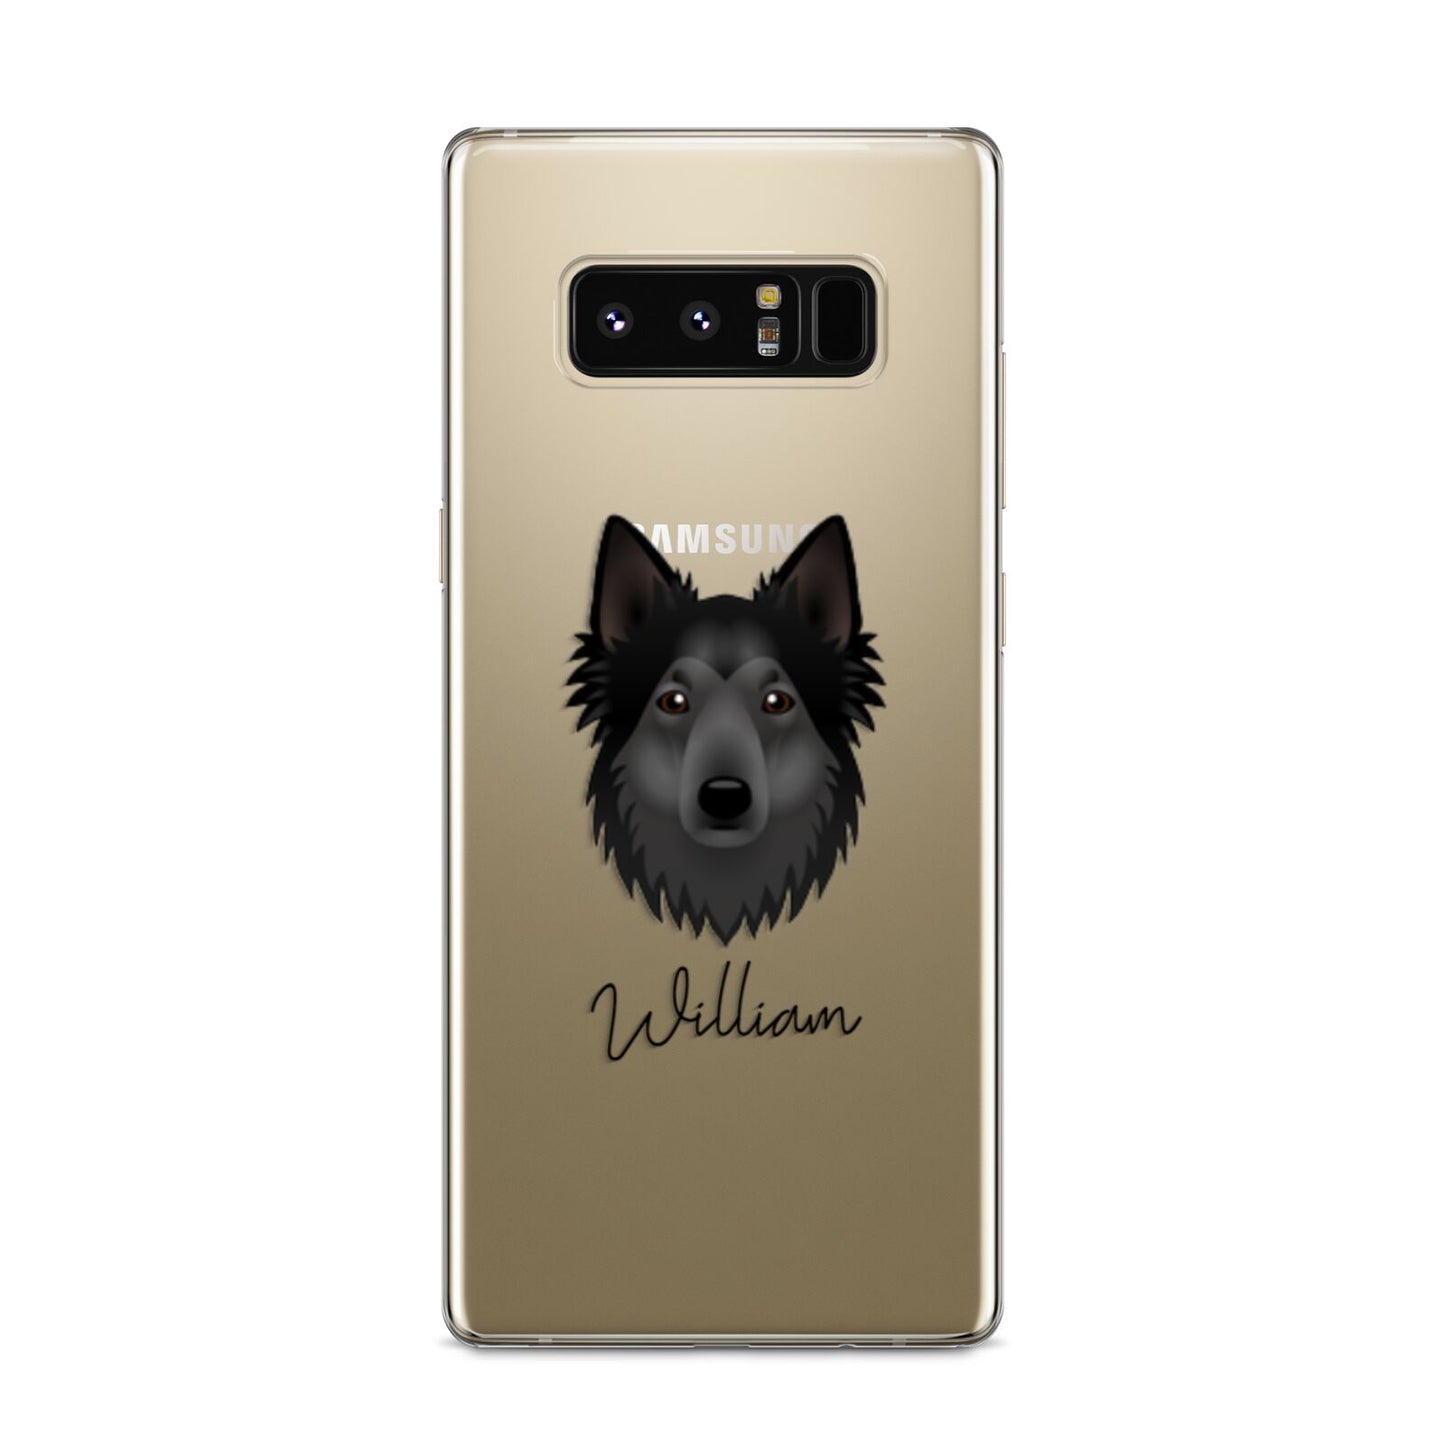 Shollie Personalised Samsung Galaxy S8 Case